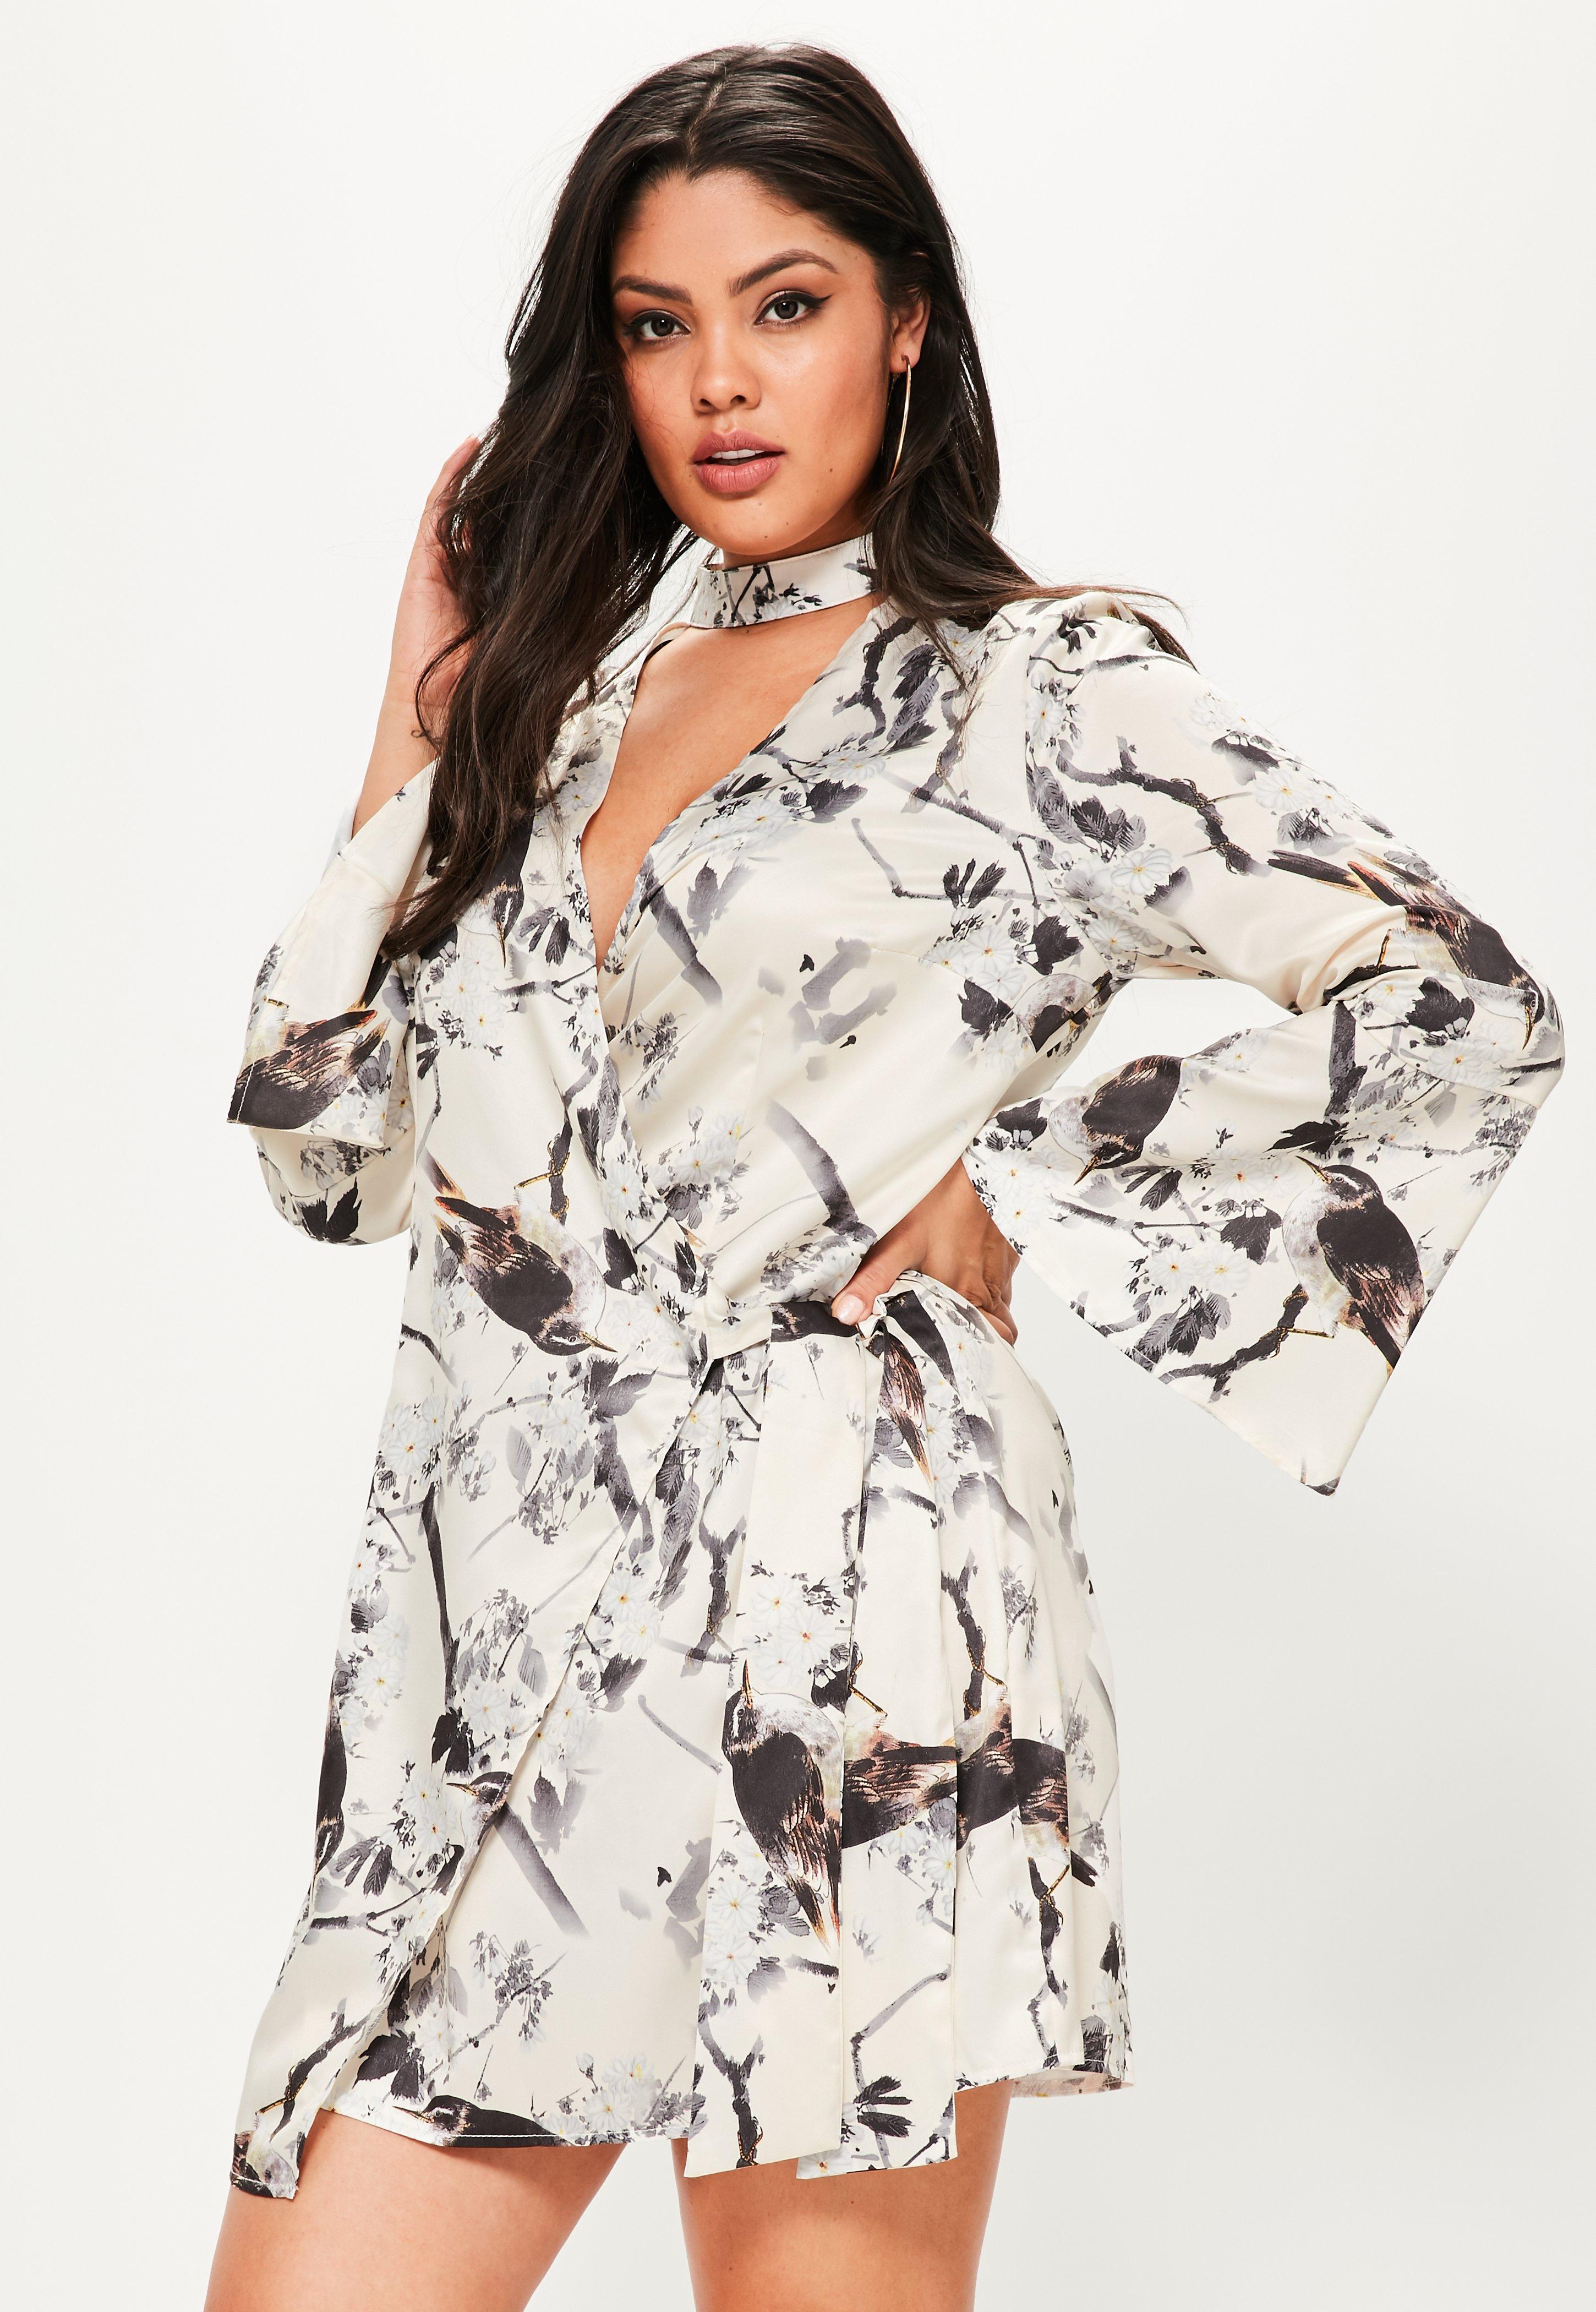 Missguided Plus Size Nude Satin Choker Neck Wrap Dress in 